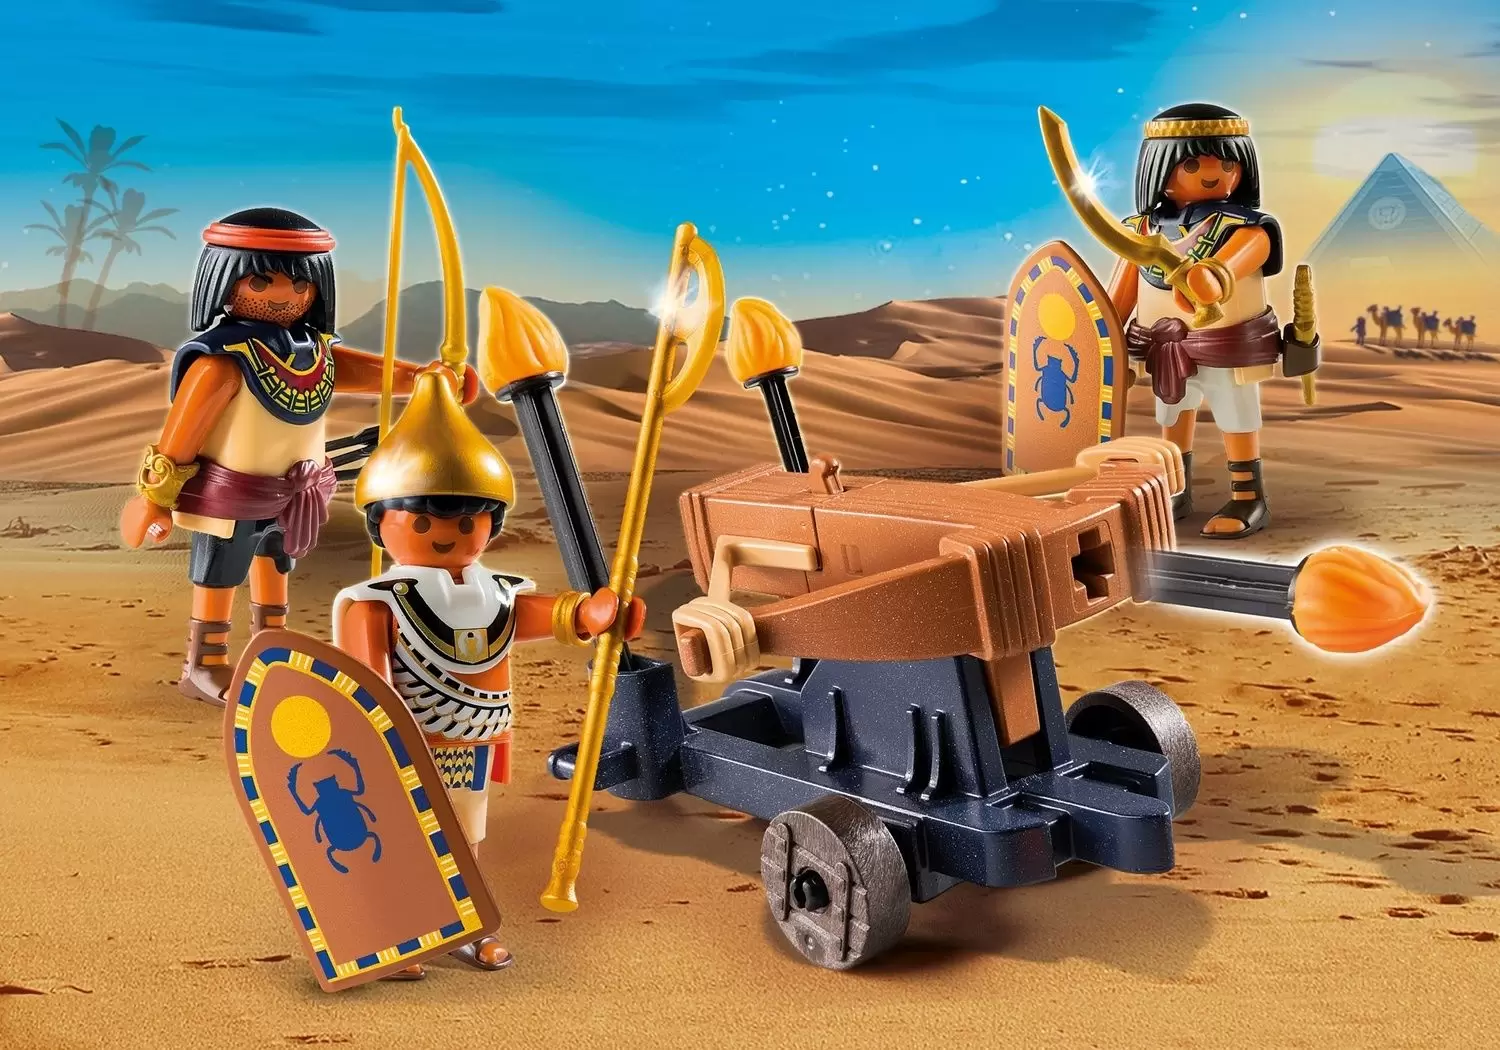 Playmobil Antic History - Egyptians with Crossbow fire